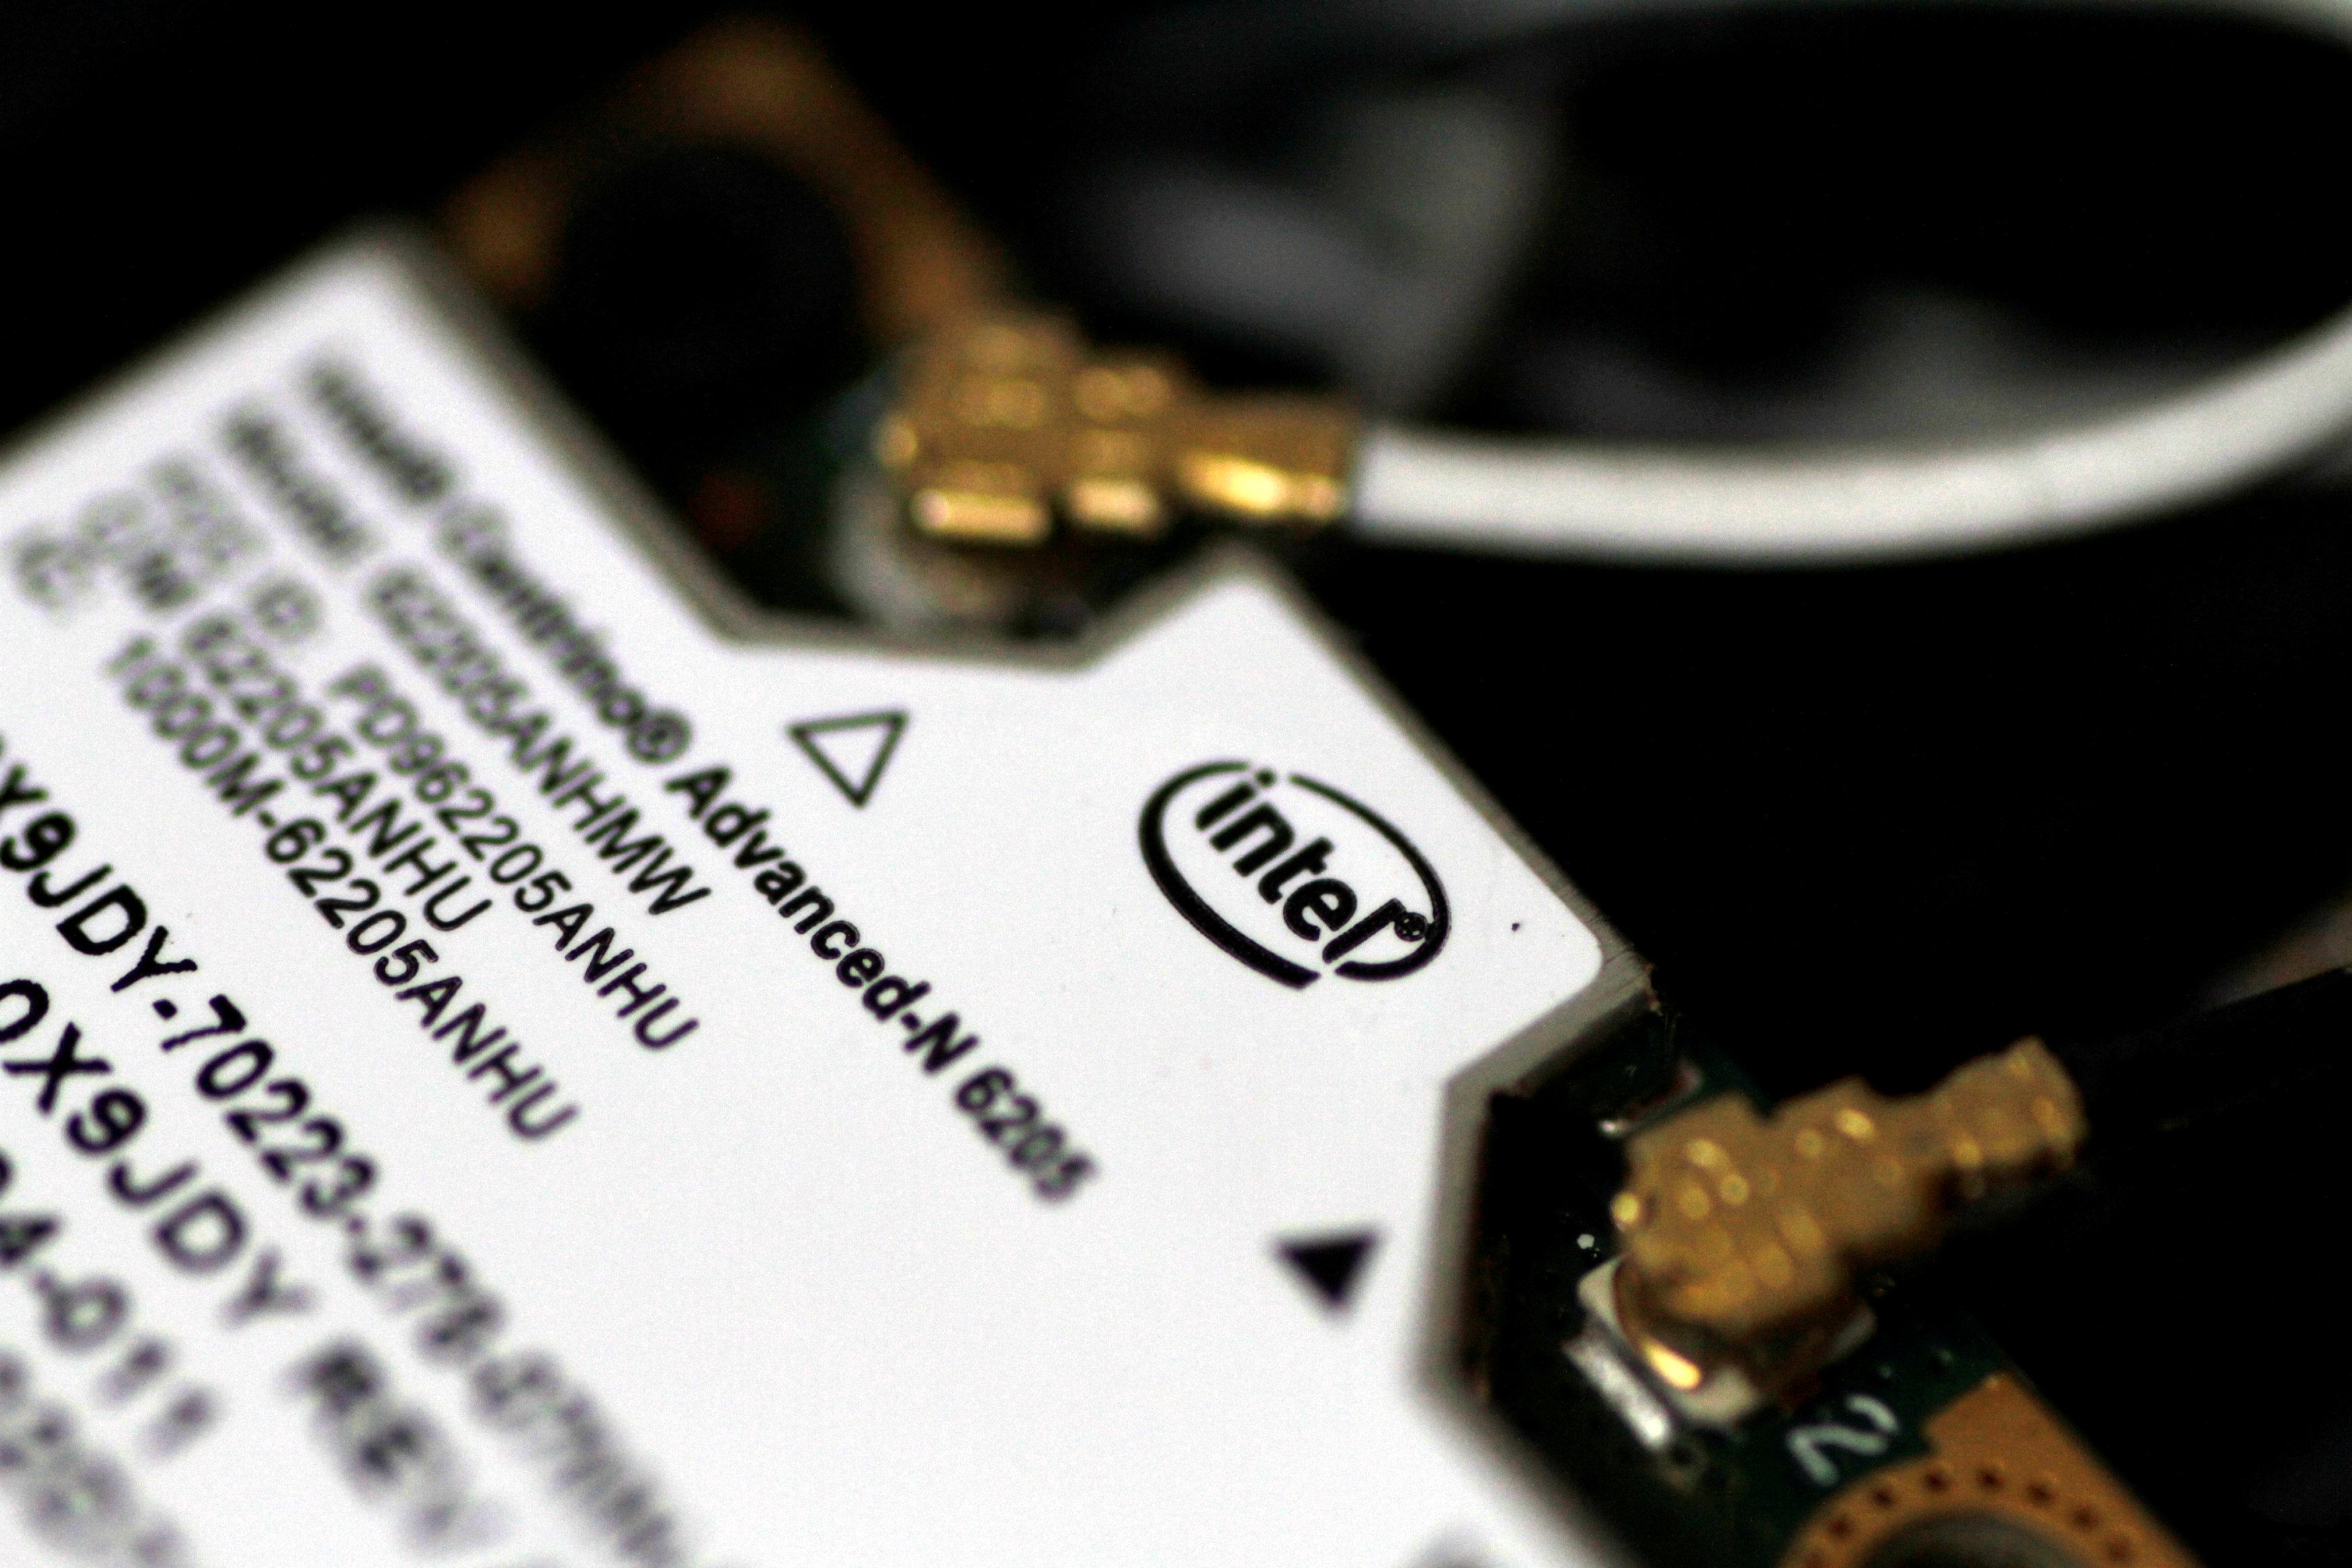 Intel asks customers to halt patching for chip bug, citing flaw